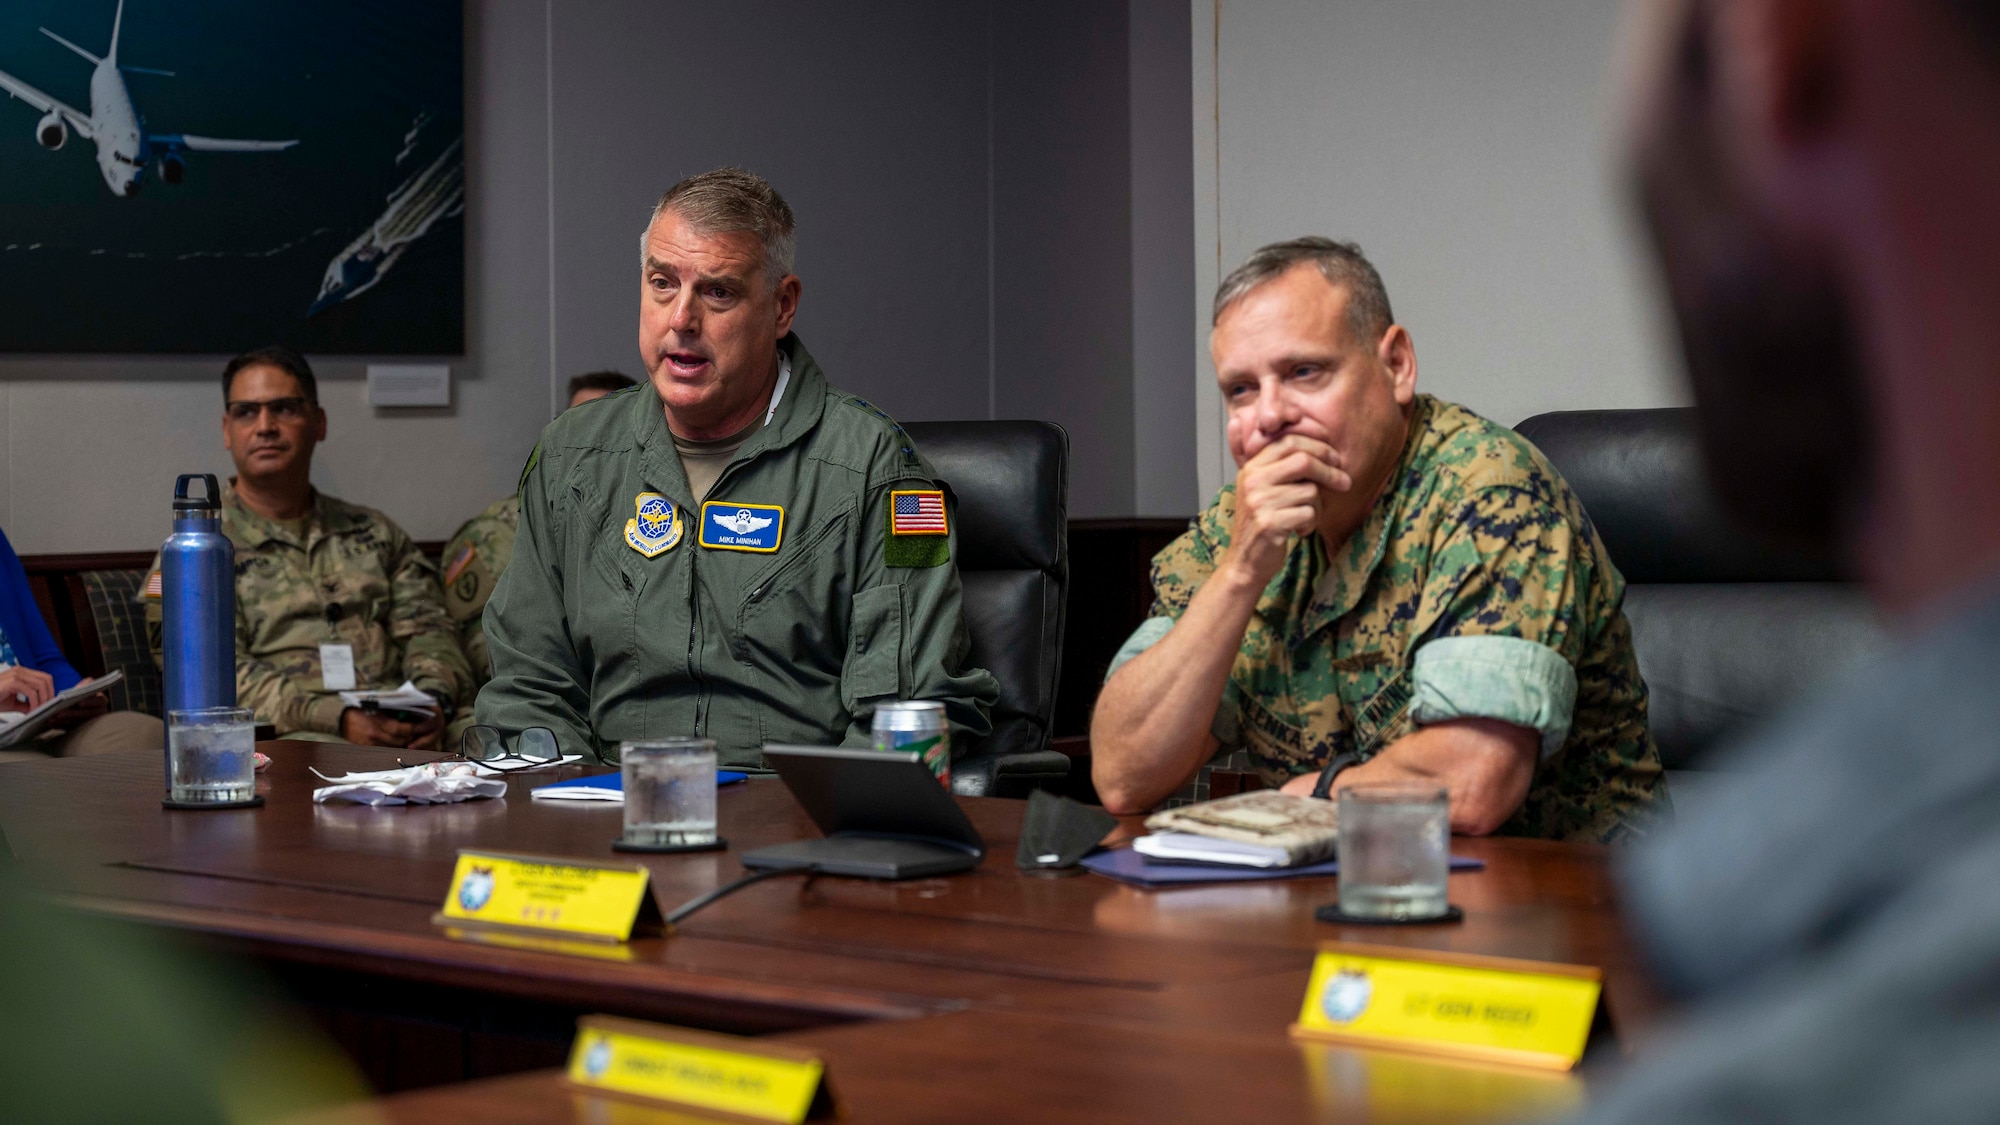 CAMP H.M. SMITH, Hawaii (June 23, 2022) Gen. Michael Minihan, Commander of Air Mobility Command, left, delivers remarks during a meeting at USINDOPACOM headquarters. AMC leaders met with USINDOPACOM as well as their Pacific Air Forces counterparts to present a road map for readying Mobility Air Forces for Agile Combat Employment in the Indo-Pacific theater. (U.S. Navy photo by Mass Communication Specialist 1st Class Anthony J. Rivera)